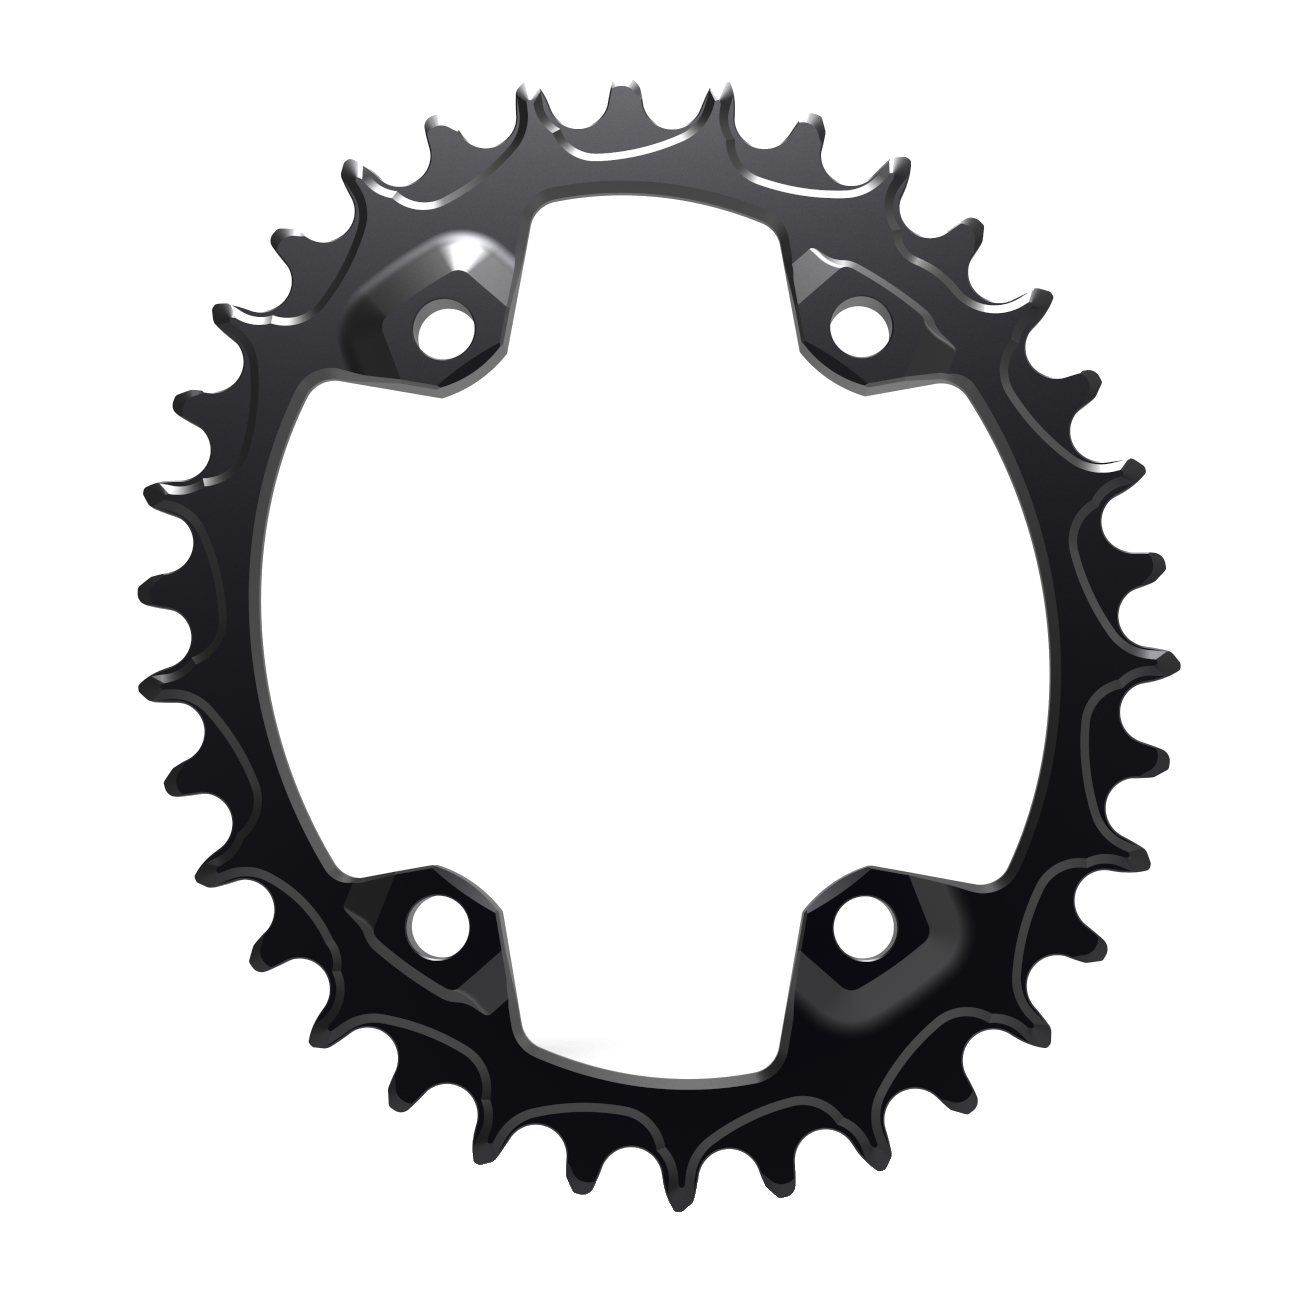 Image of Alugear Narrow Wide MTB Chainring - Oval - for Shimano 96 BCD Asymmetric - 4-Bolt